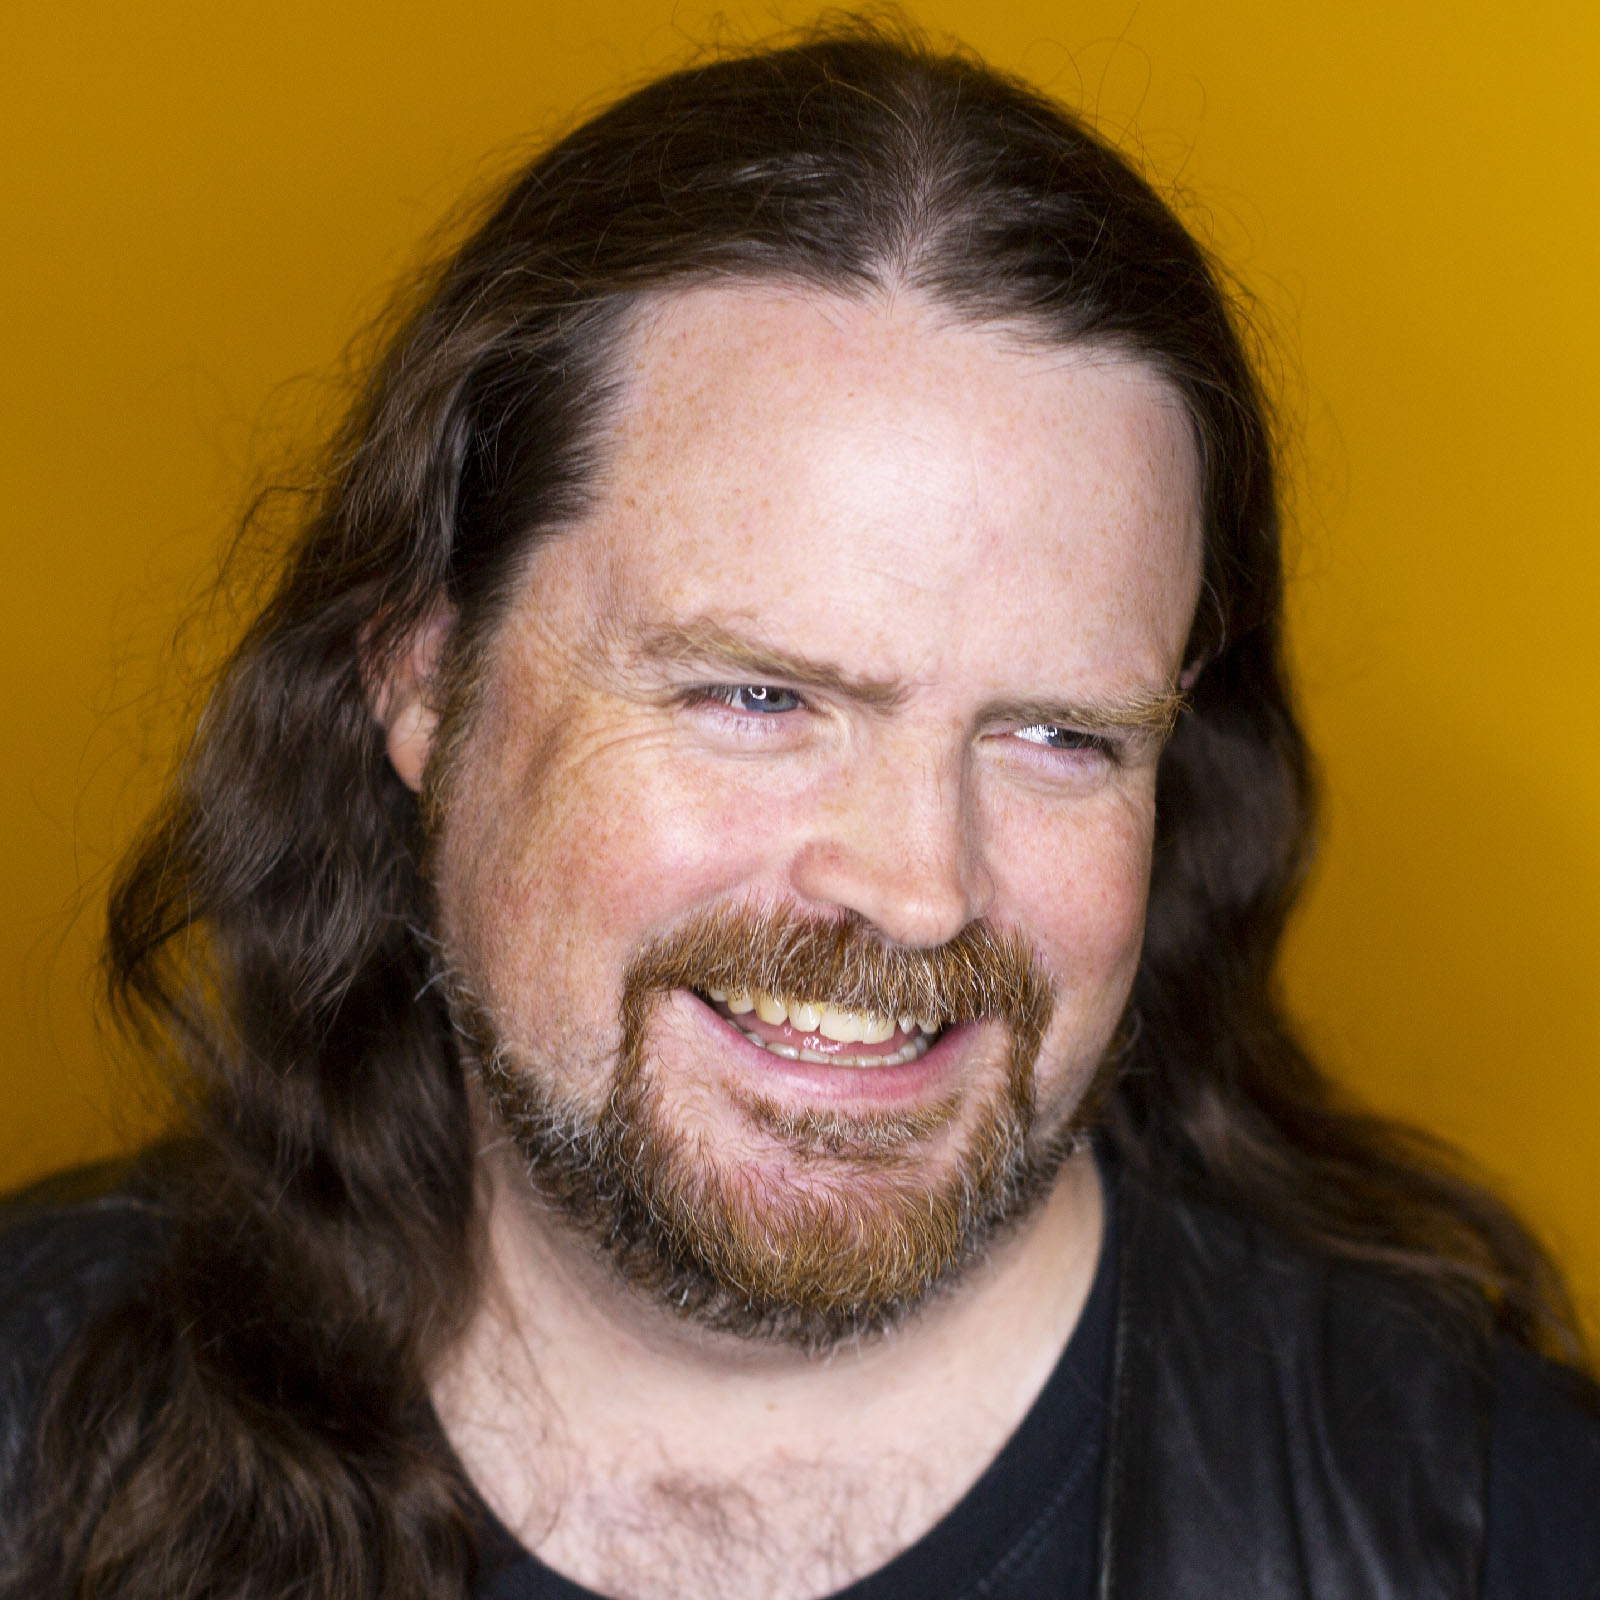 Studio headshot of Dylan Beattie in front of a yellow background.